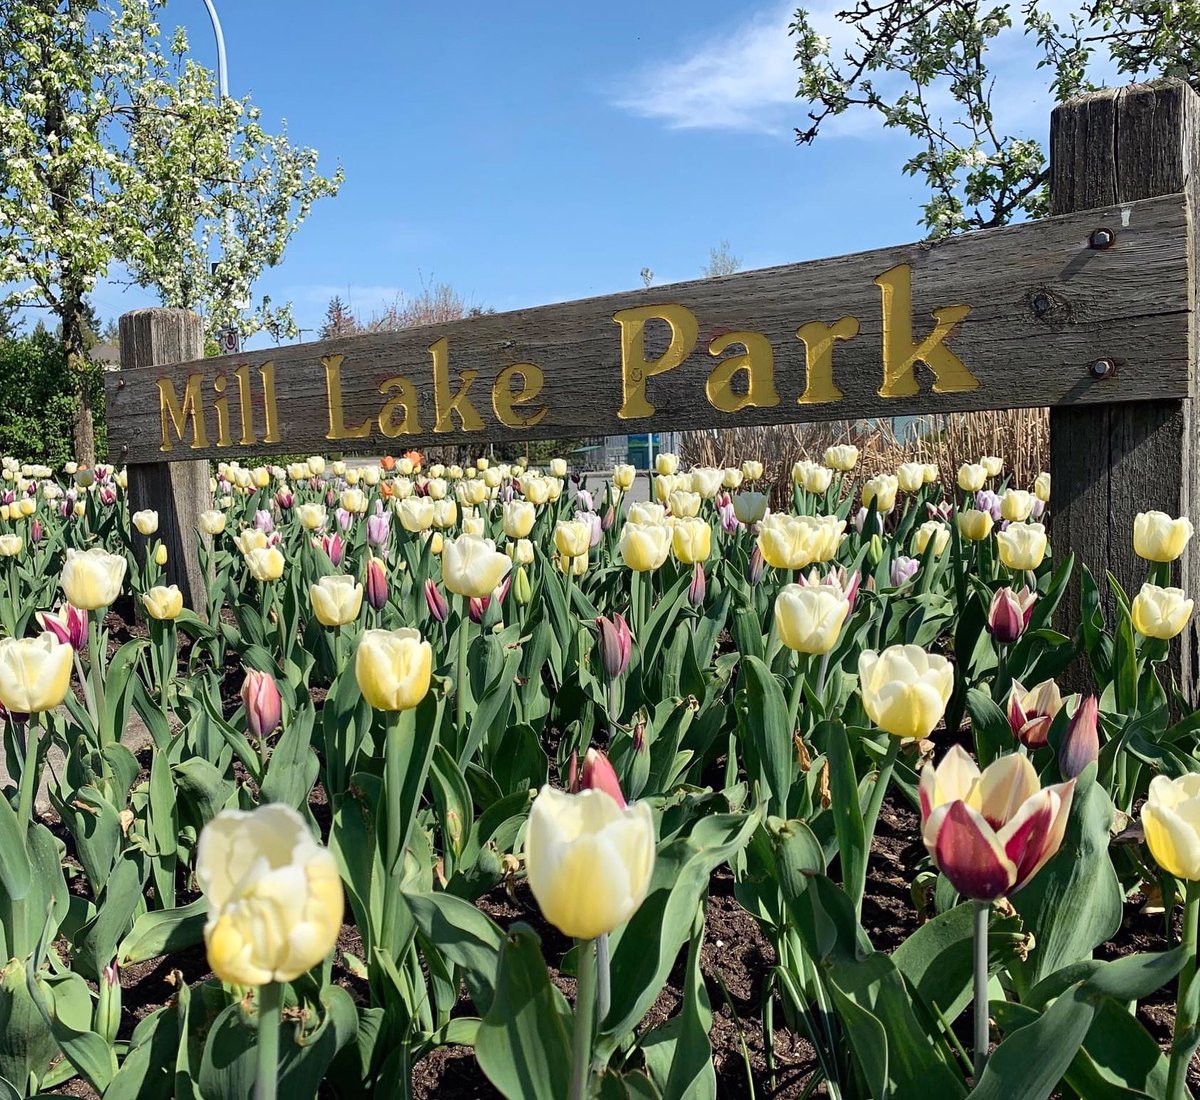 Mill Lake Park is a beautiful and diverse green space nestled in the heart of Abbotsford.🌷

The City of Abbotsford is a past recipient of the ‘5 Bloom Community’ award, and a current ‘Friend’ of the BC Communities in Bloom Program.

#exploreAbbotsford #exploreBC #GardensBC